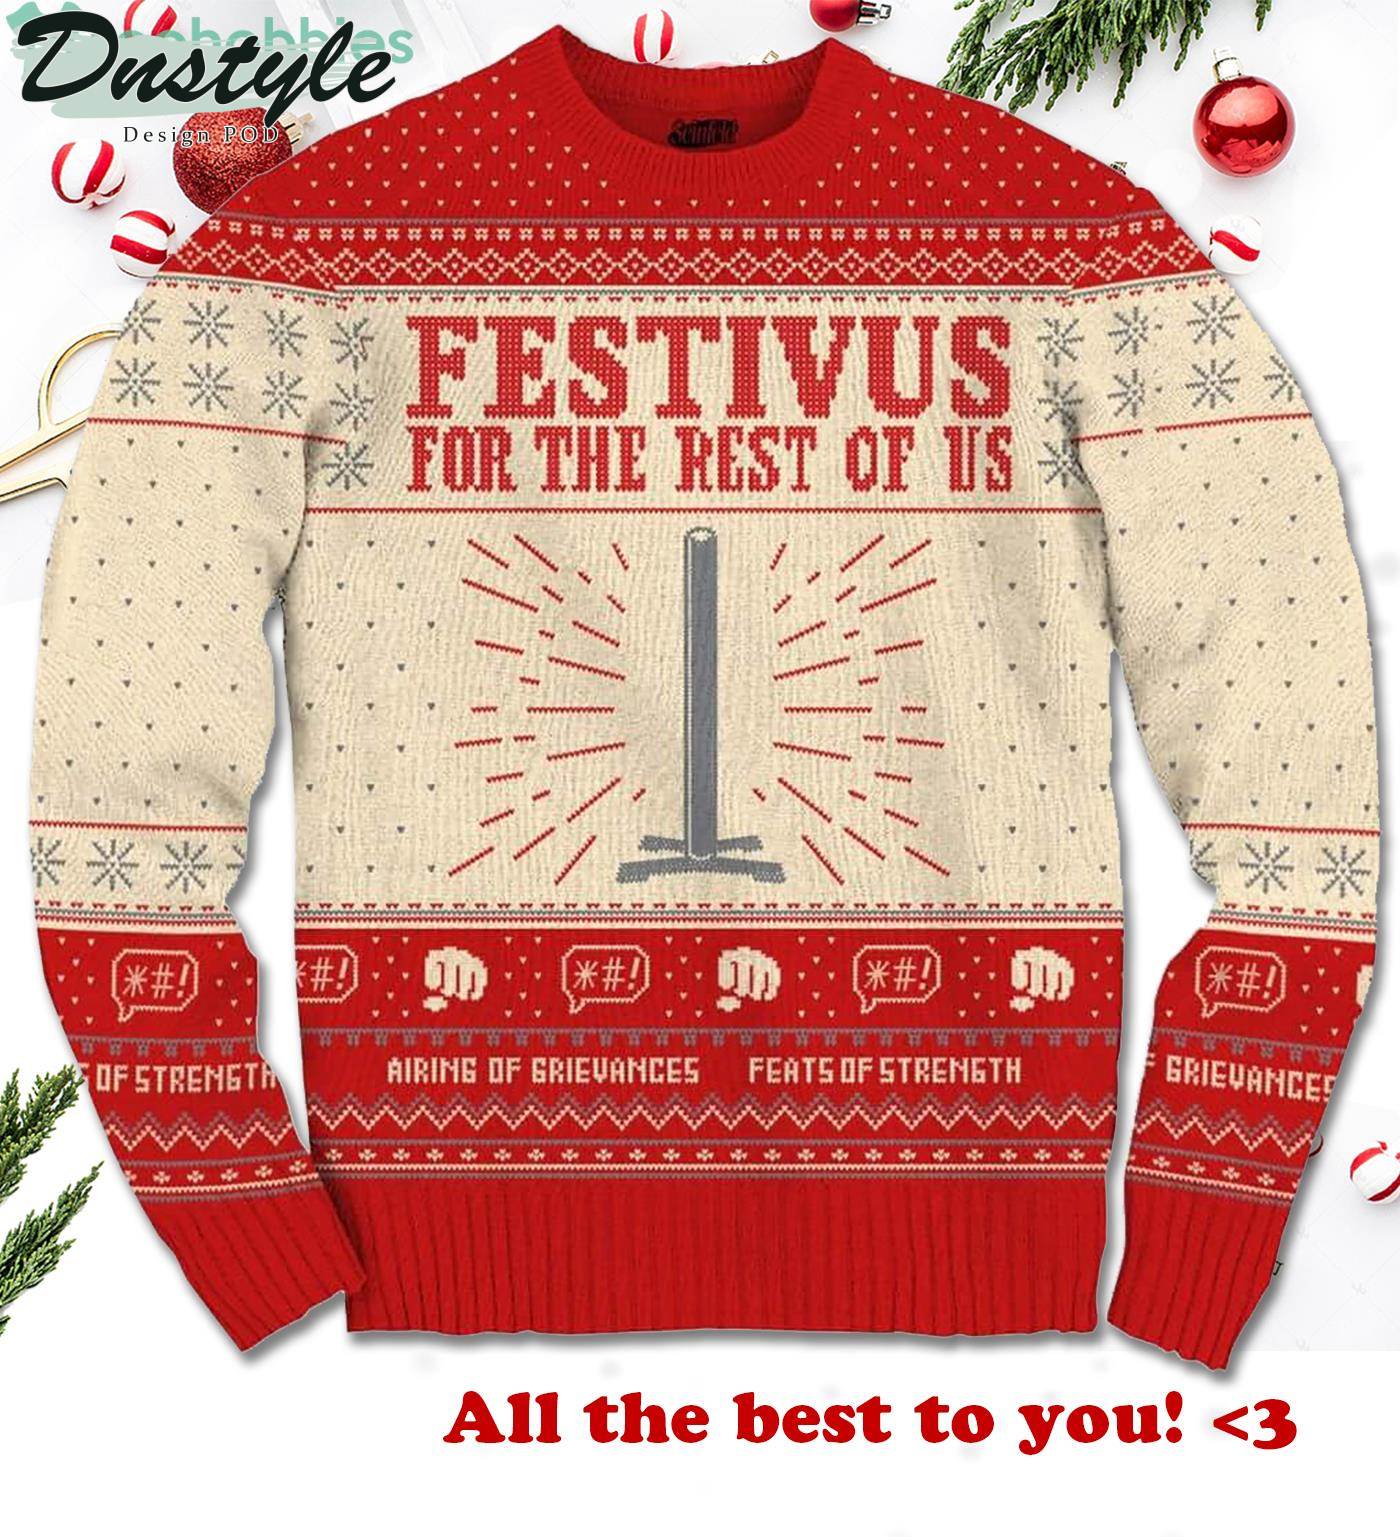 Seinfeld Festivus For The Rest Of Us Airing Of Grievances Feats Of Strength Ugly Christmas Sweater